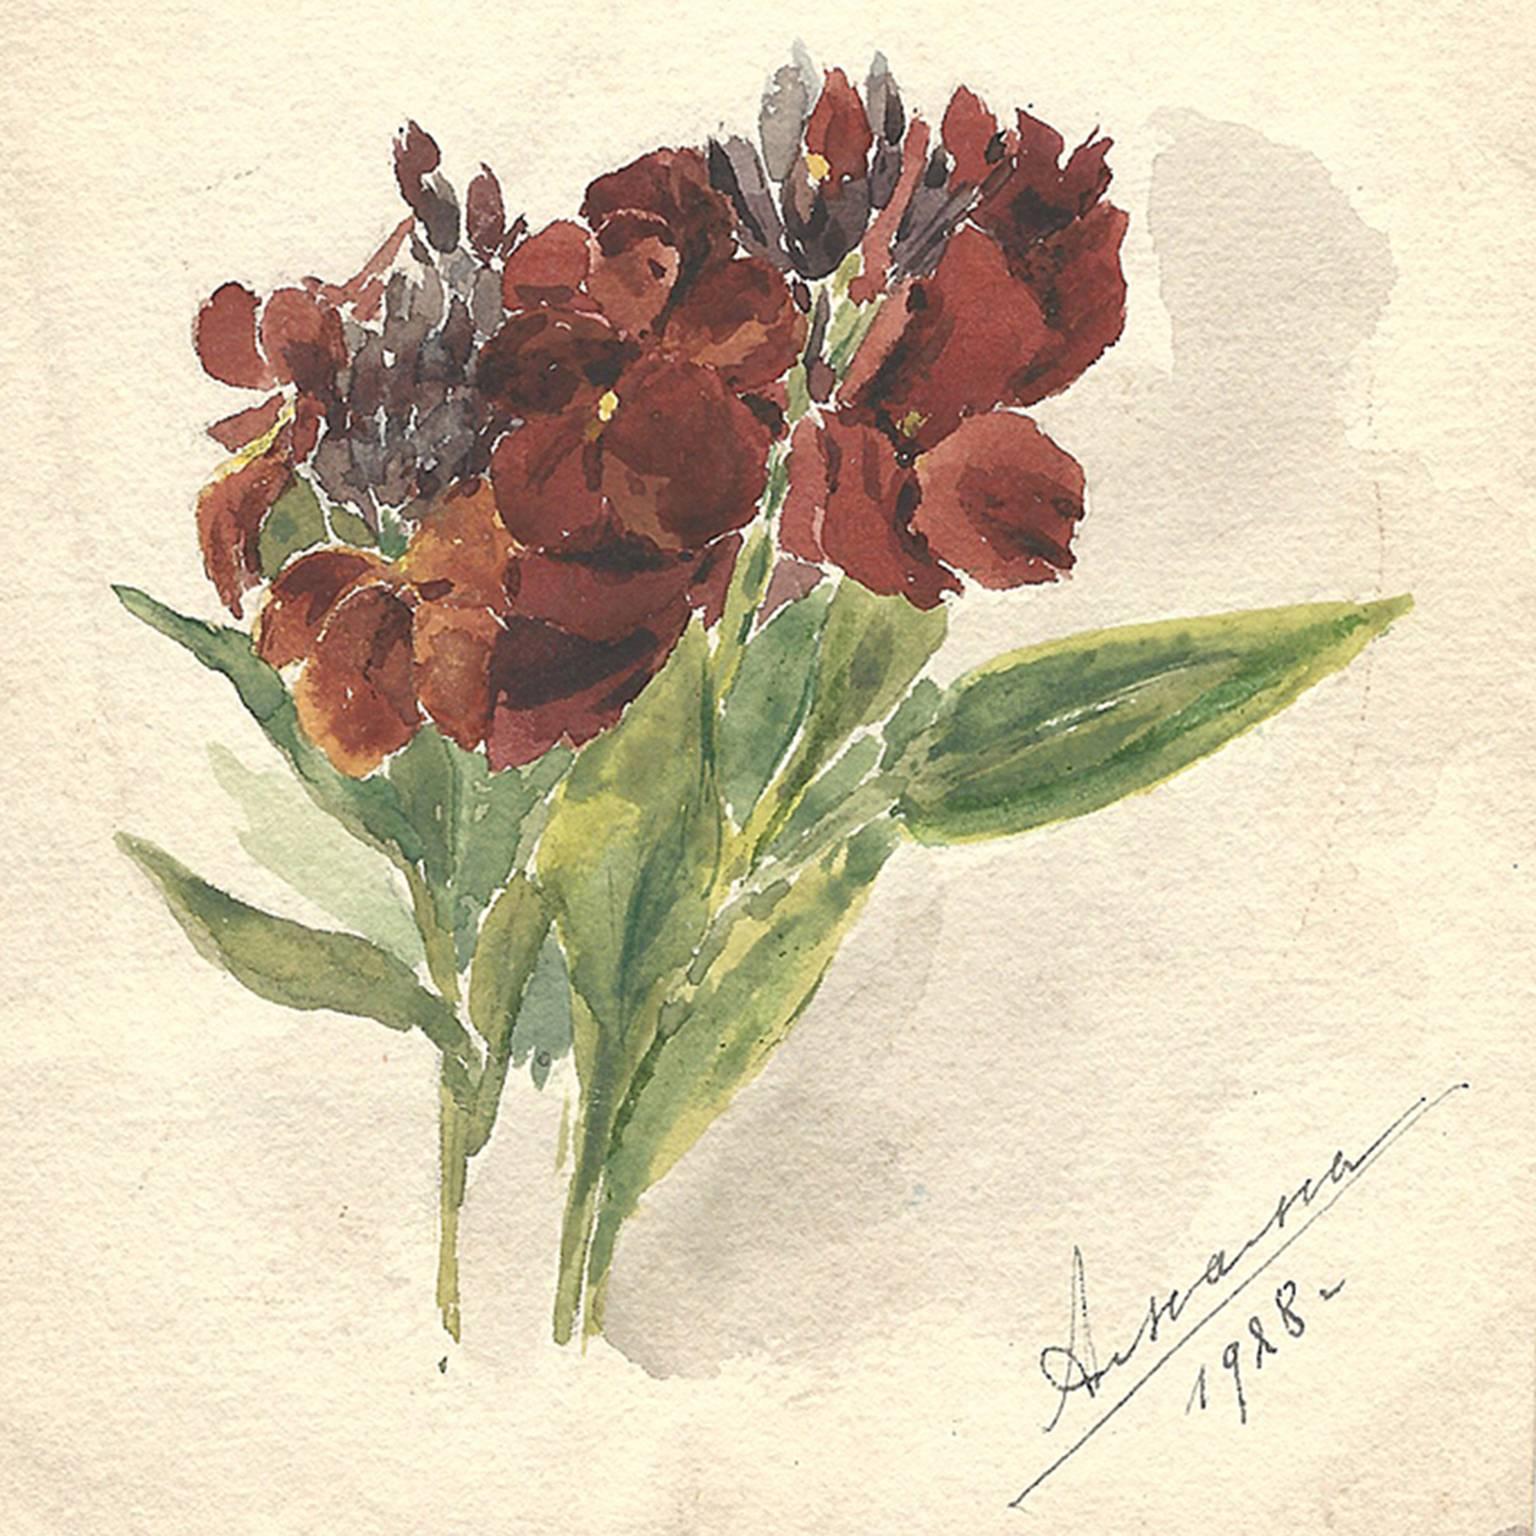 A signed watercolor of a bouquet of deep red flowers by Grand Duchess Xenia (or Ksenia) Alexandrovna (1875-1960). The bouquet of red flowers with leafy green stems is painted on card, signed at lower right 'Amama,' the Danish term for Grandmother